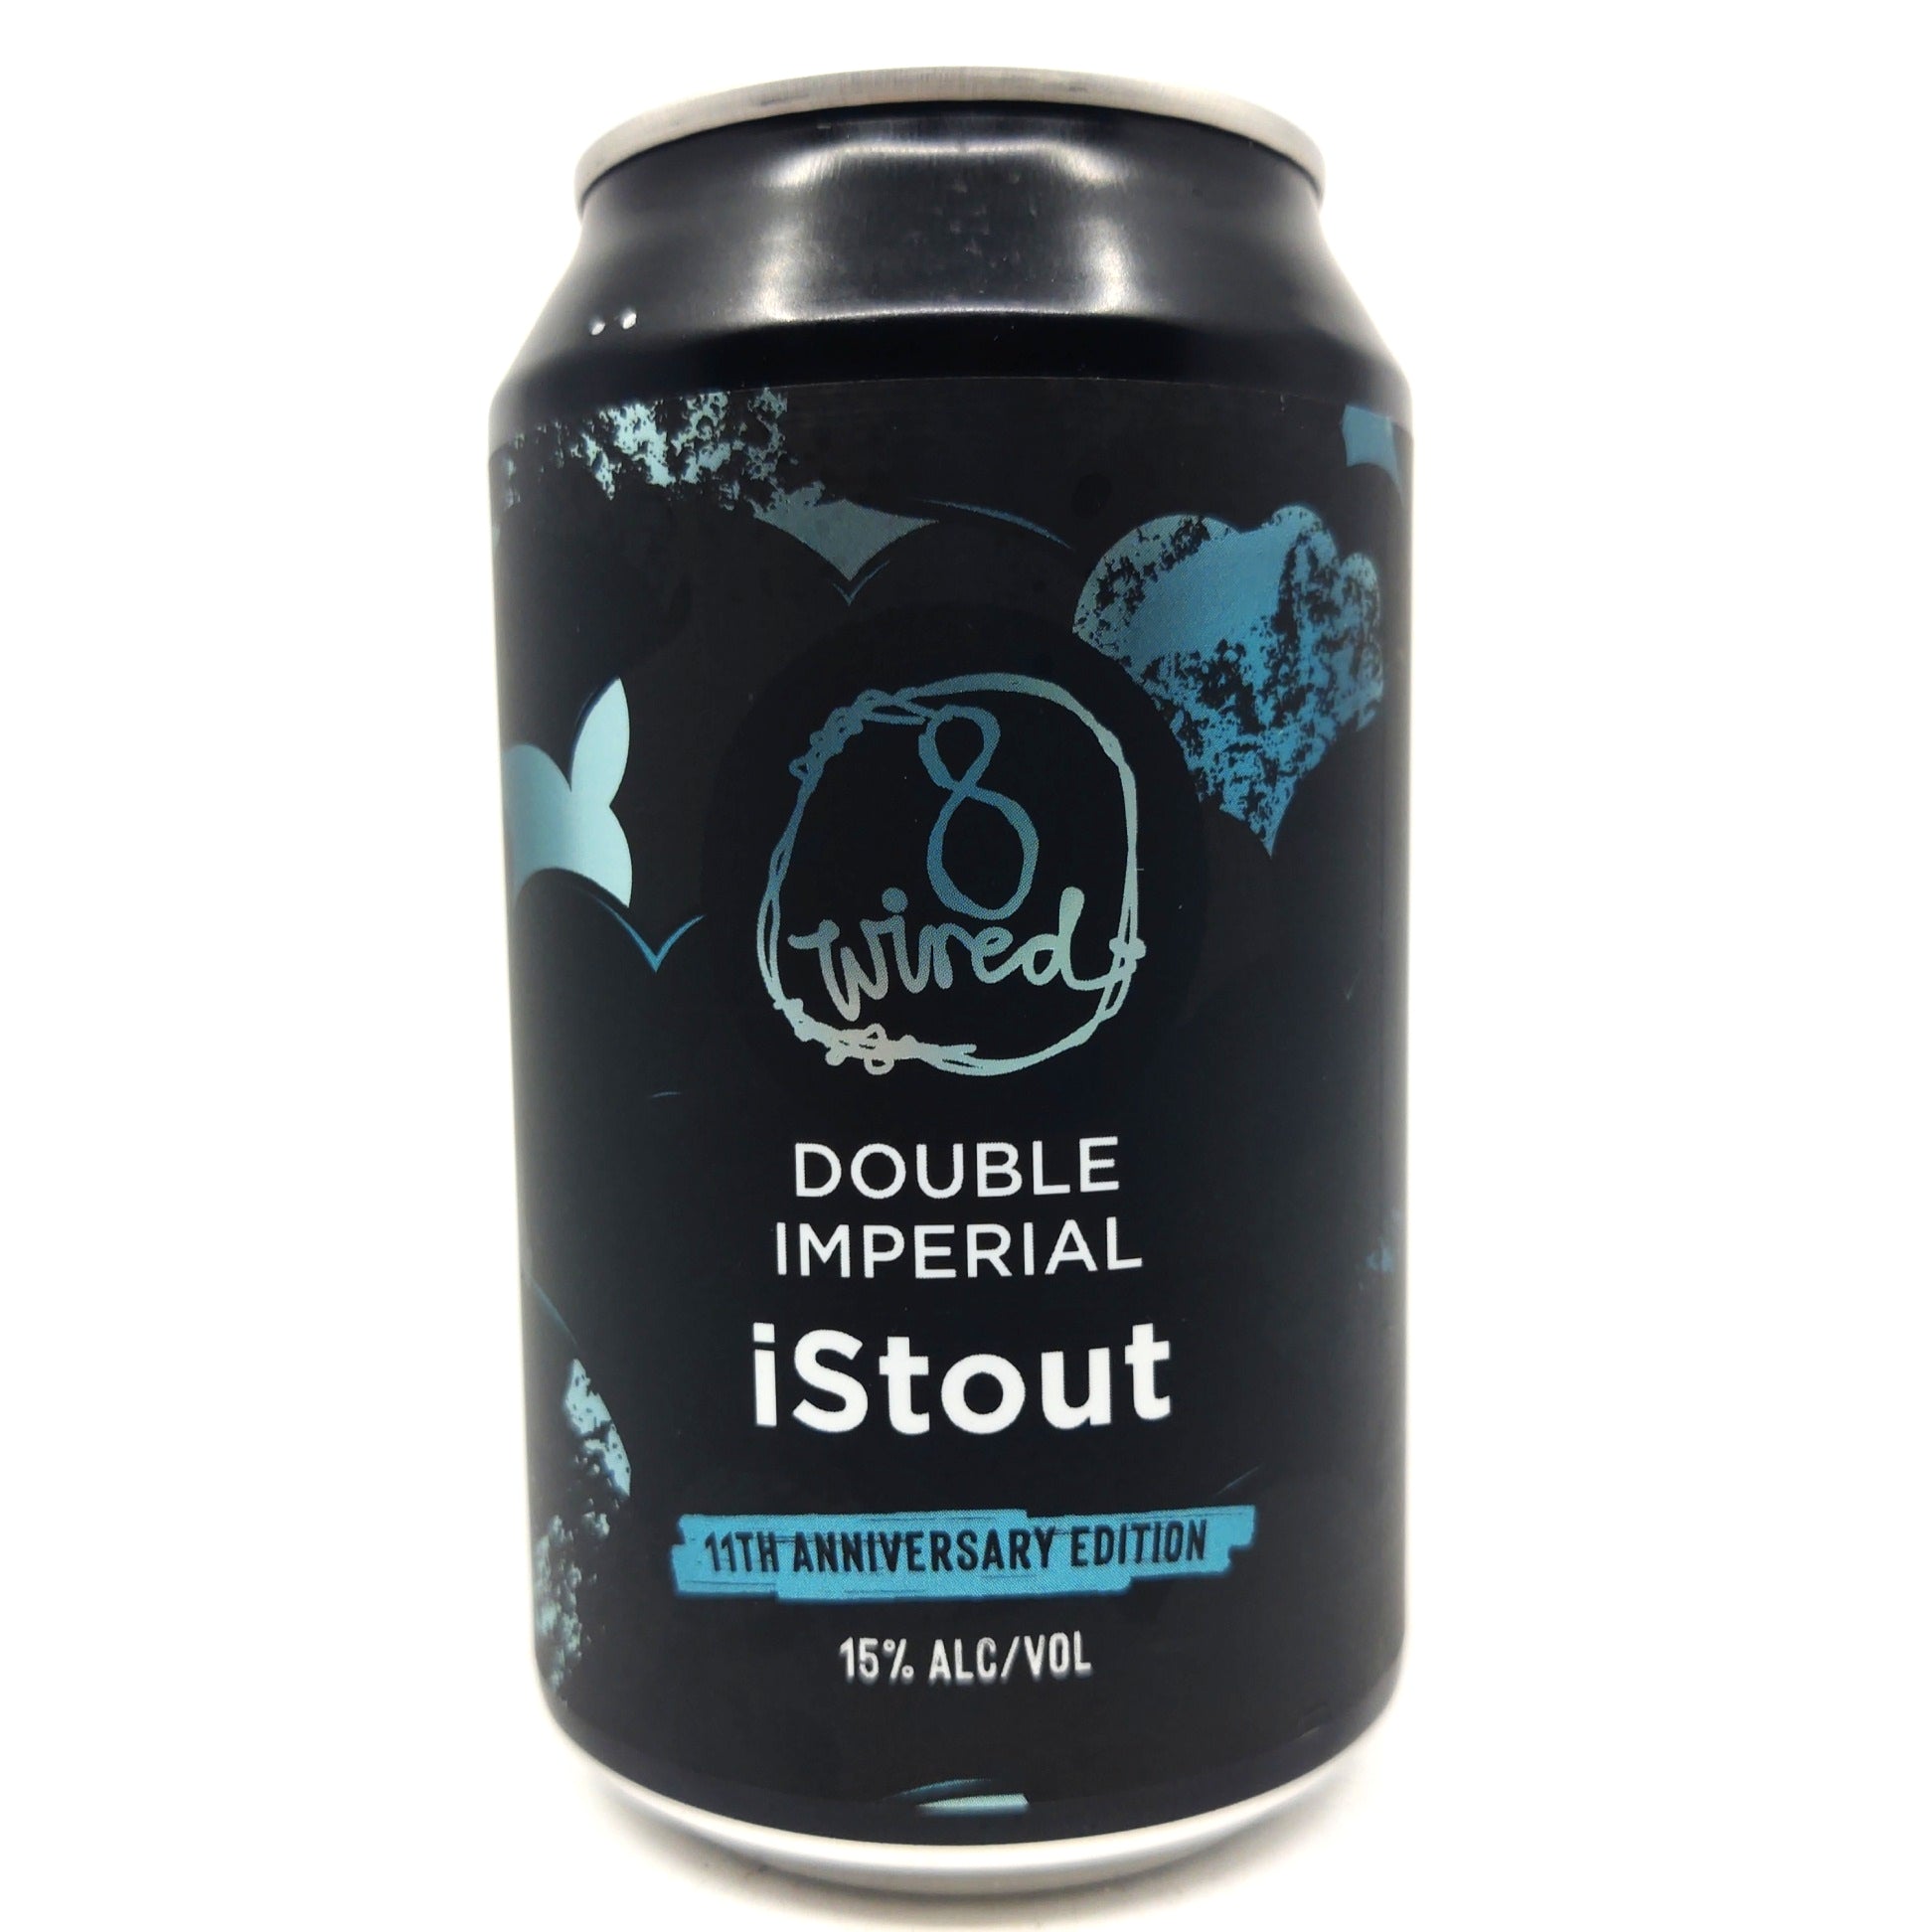 8 Wired Double Imperial iStout 11th Anniversary Edition 15% (330ml can)-Hop Burns & Black